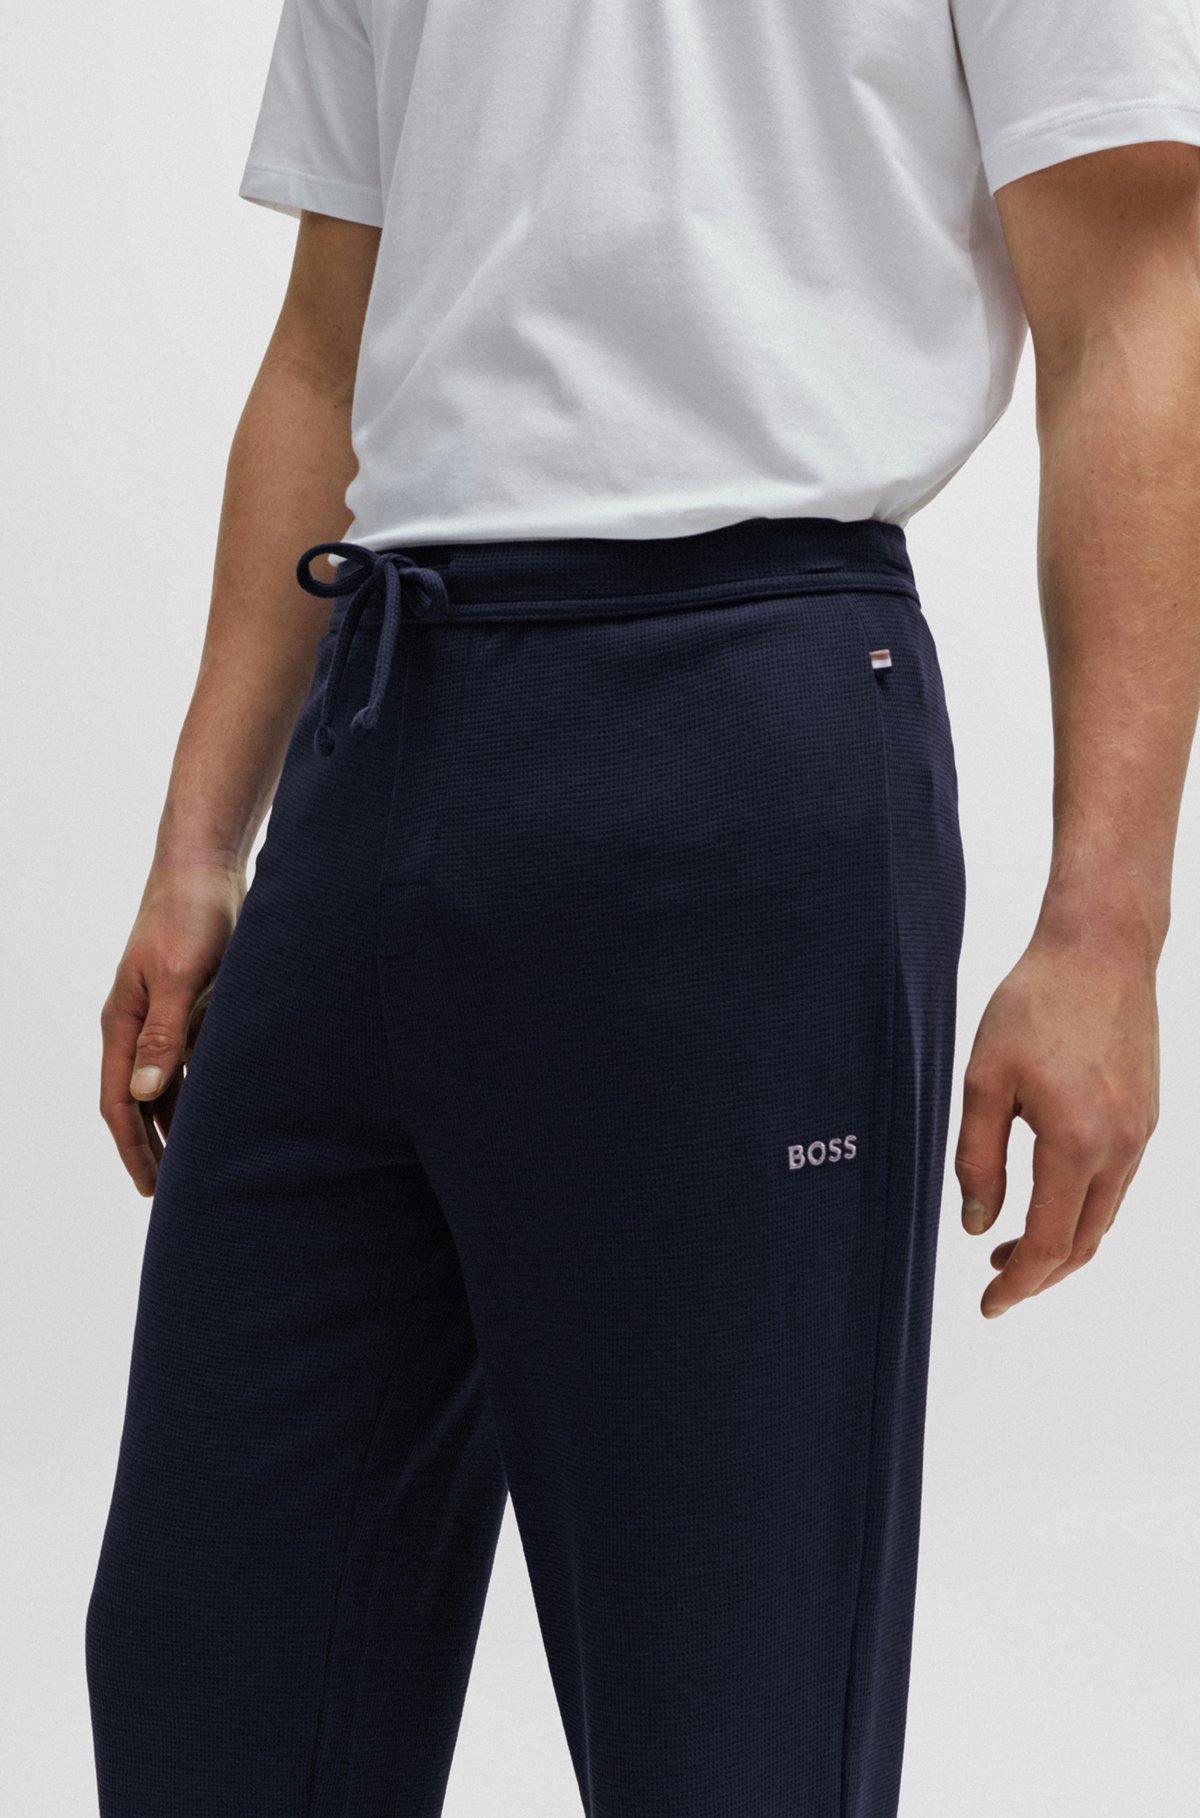 BOSS - Cotton-blend pyjama bottoms with embroidered logo